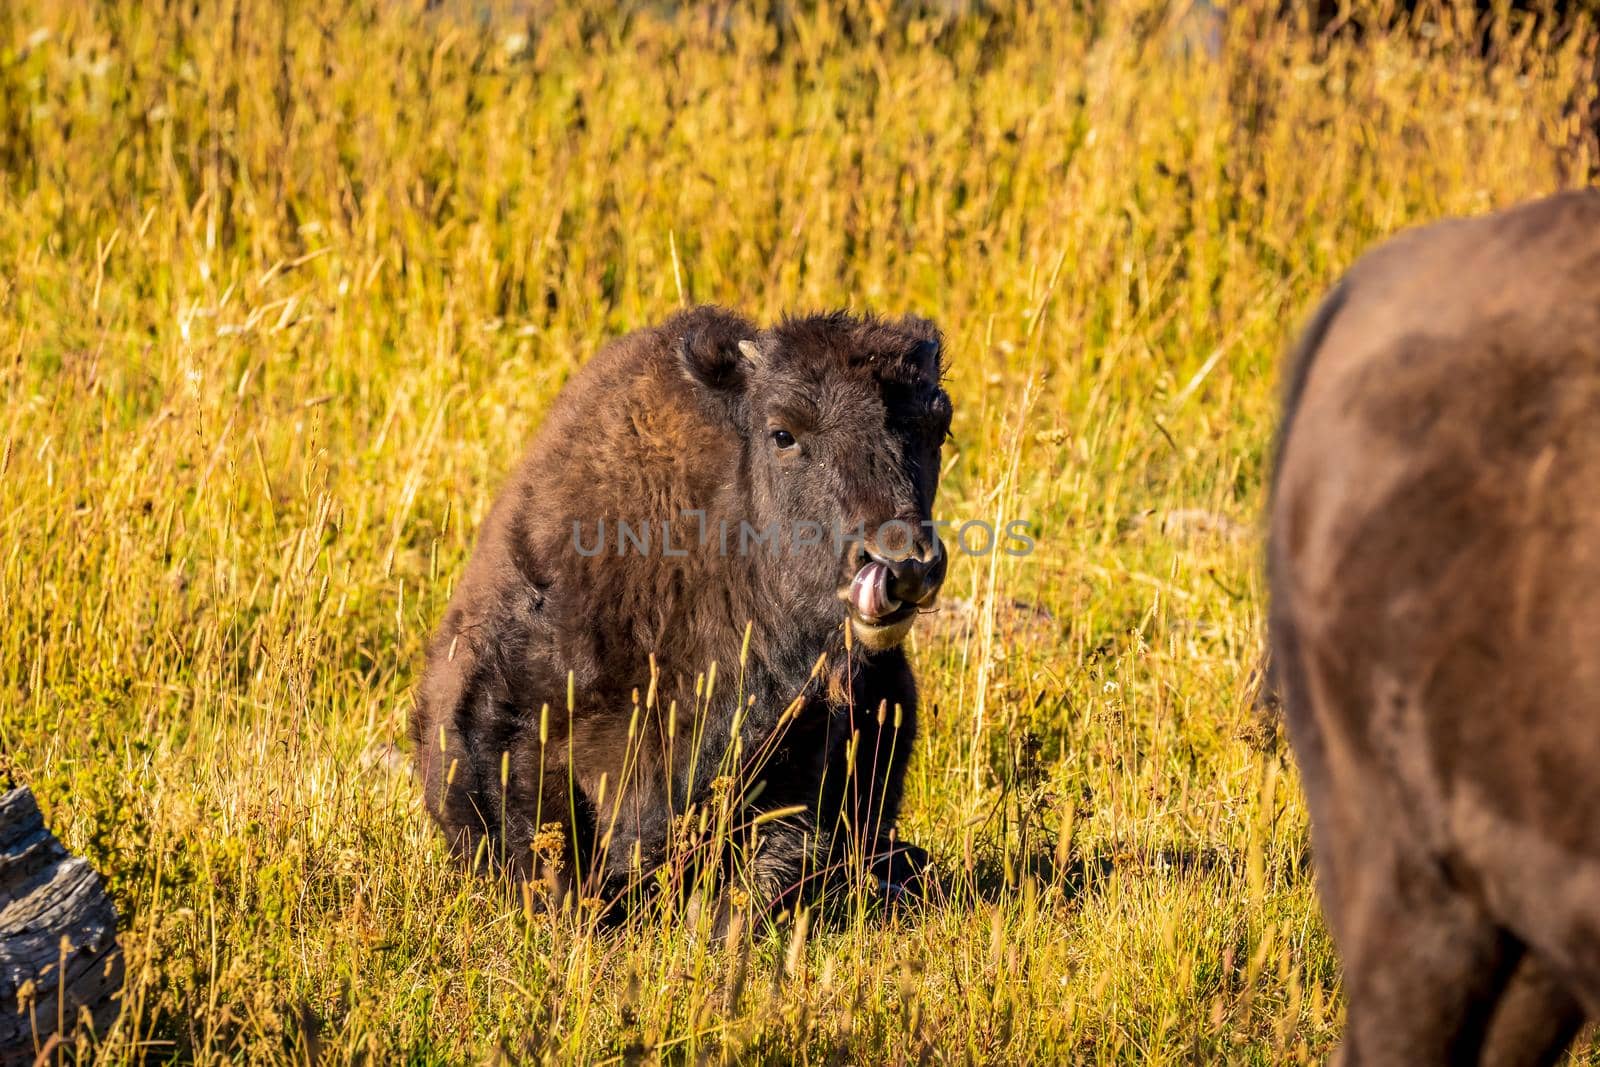 Wild Bison calf at Yellowstone by gepeng